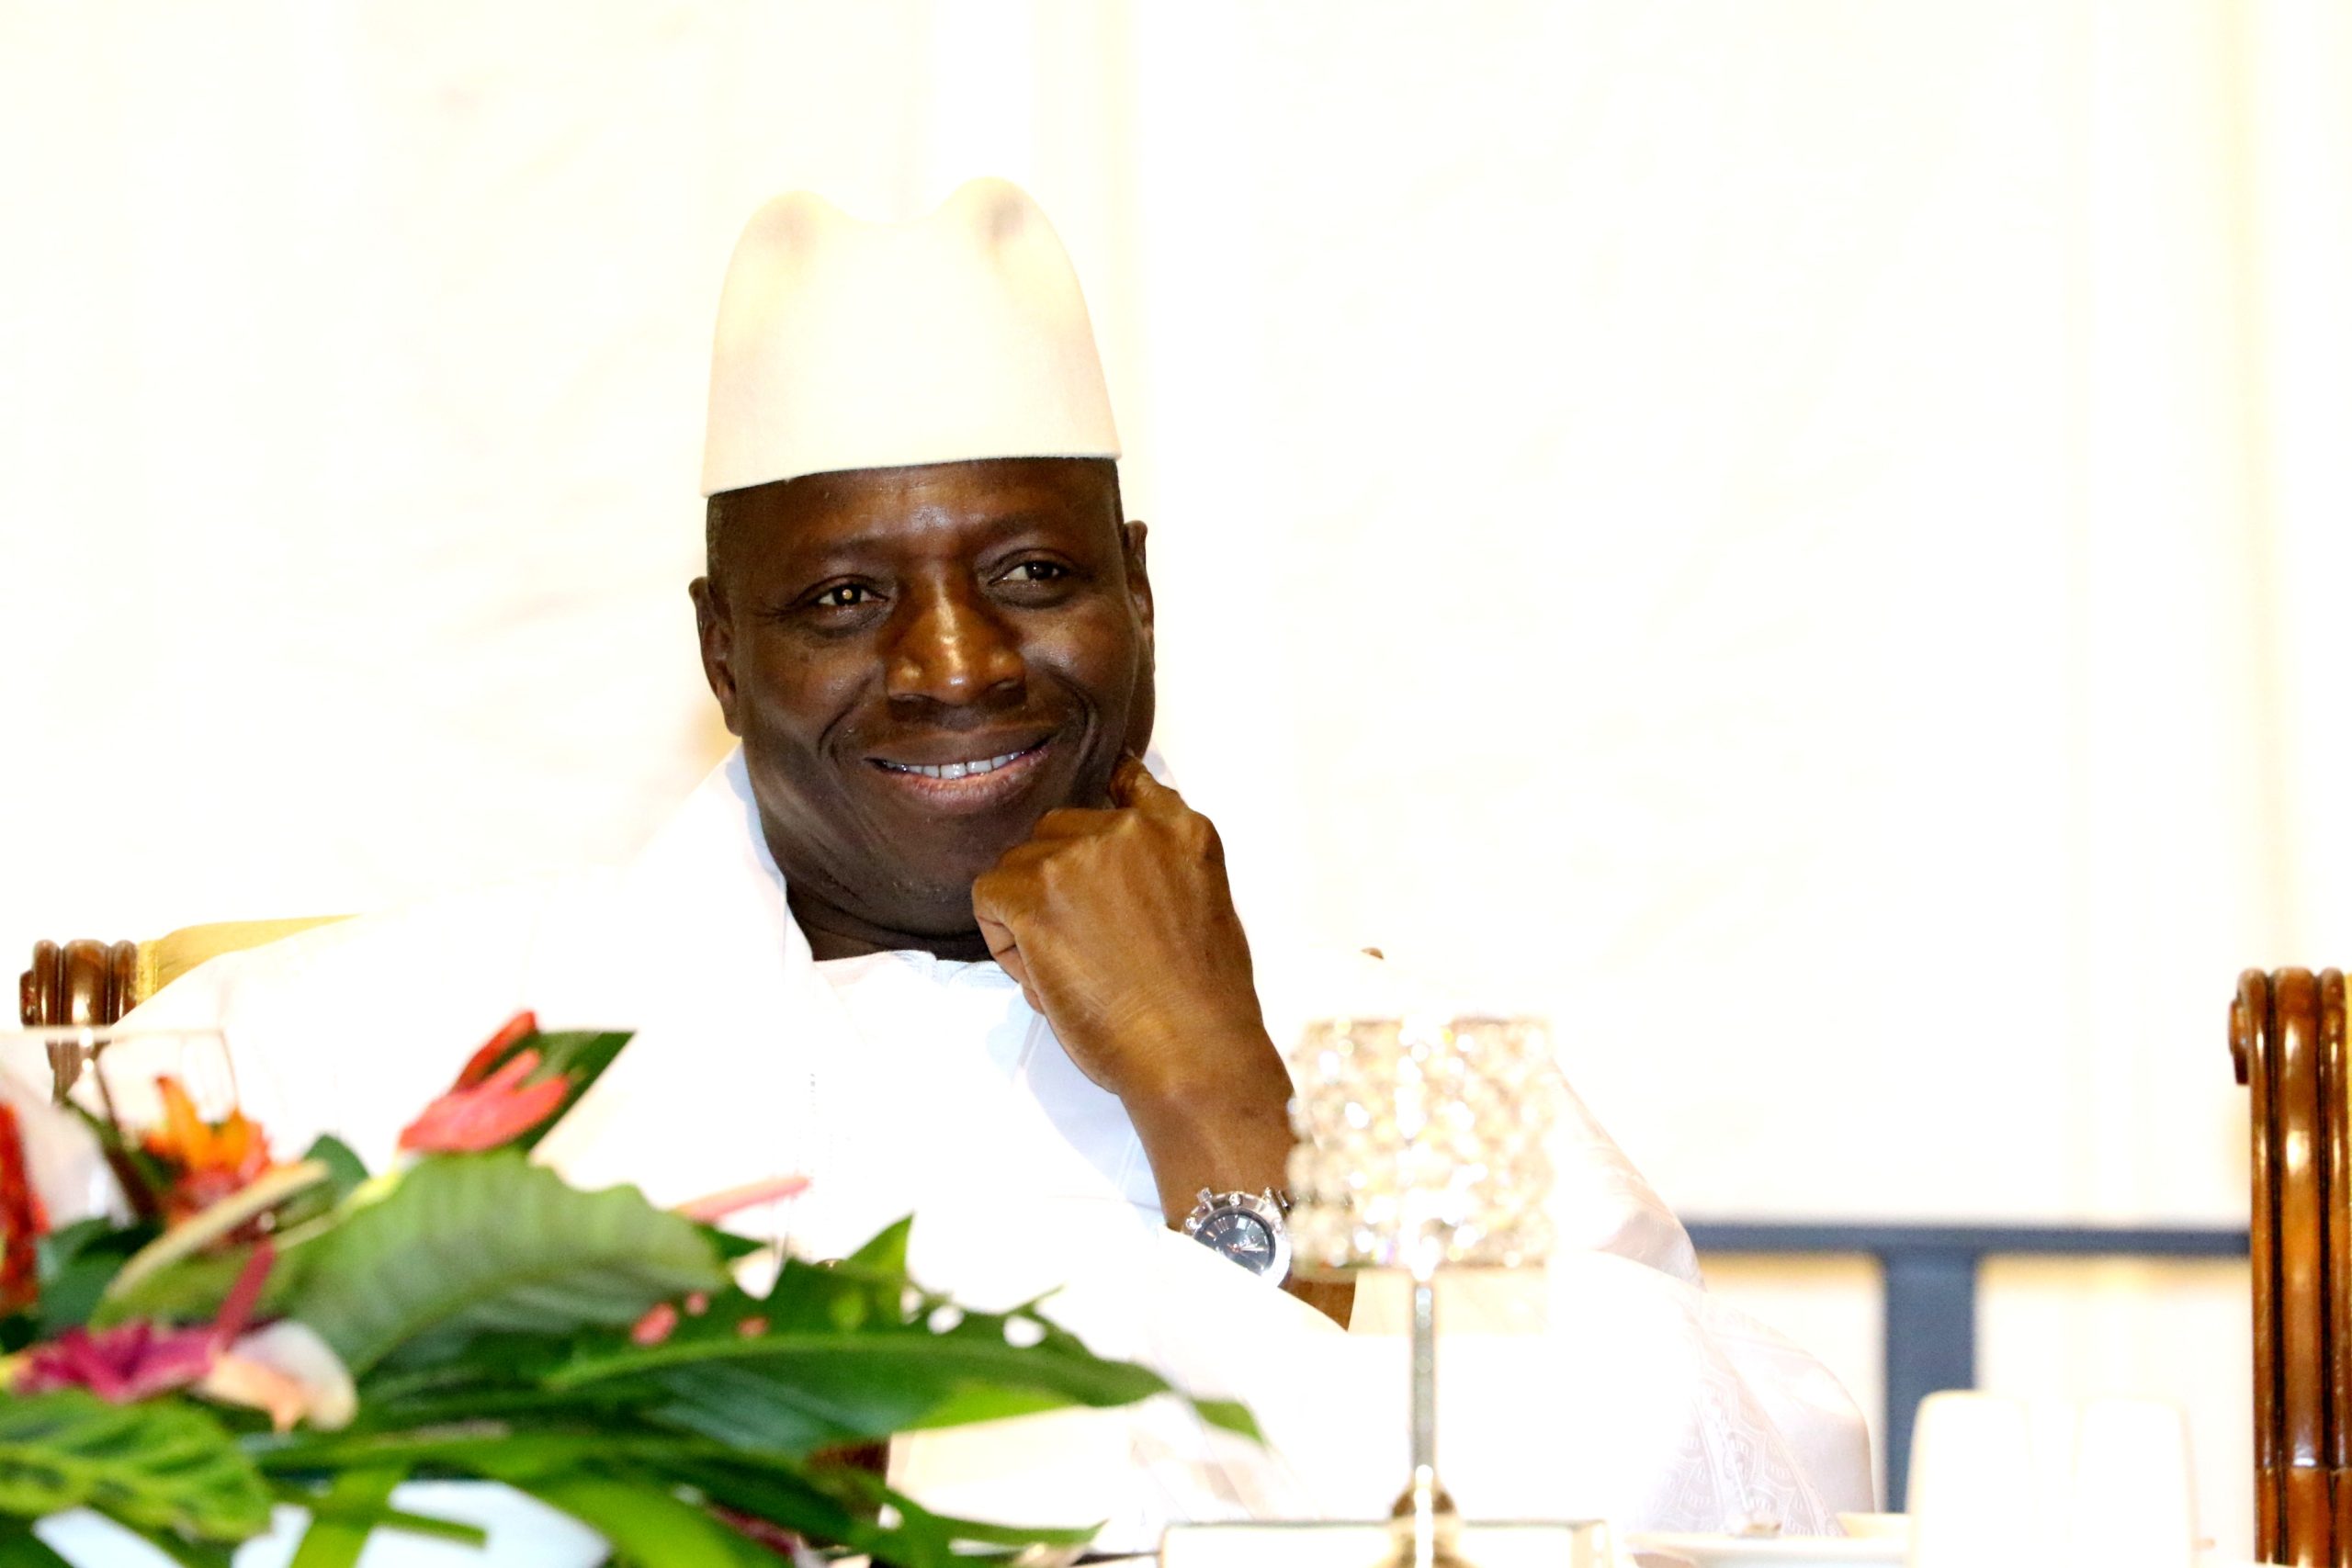 BUYERS OF JAMMEH’S SEIZED PROPERTIES REVEALED